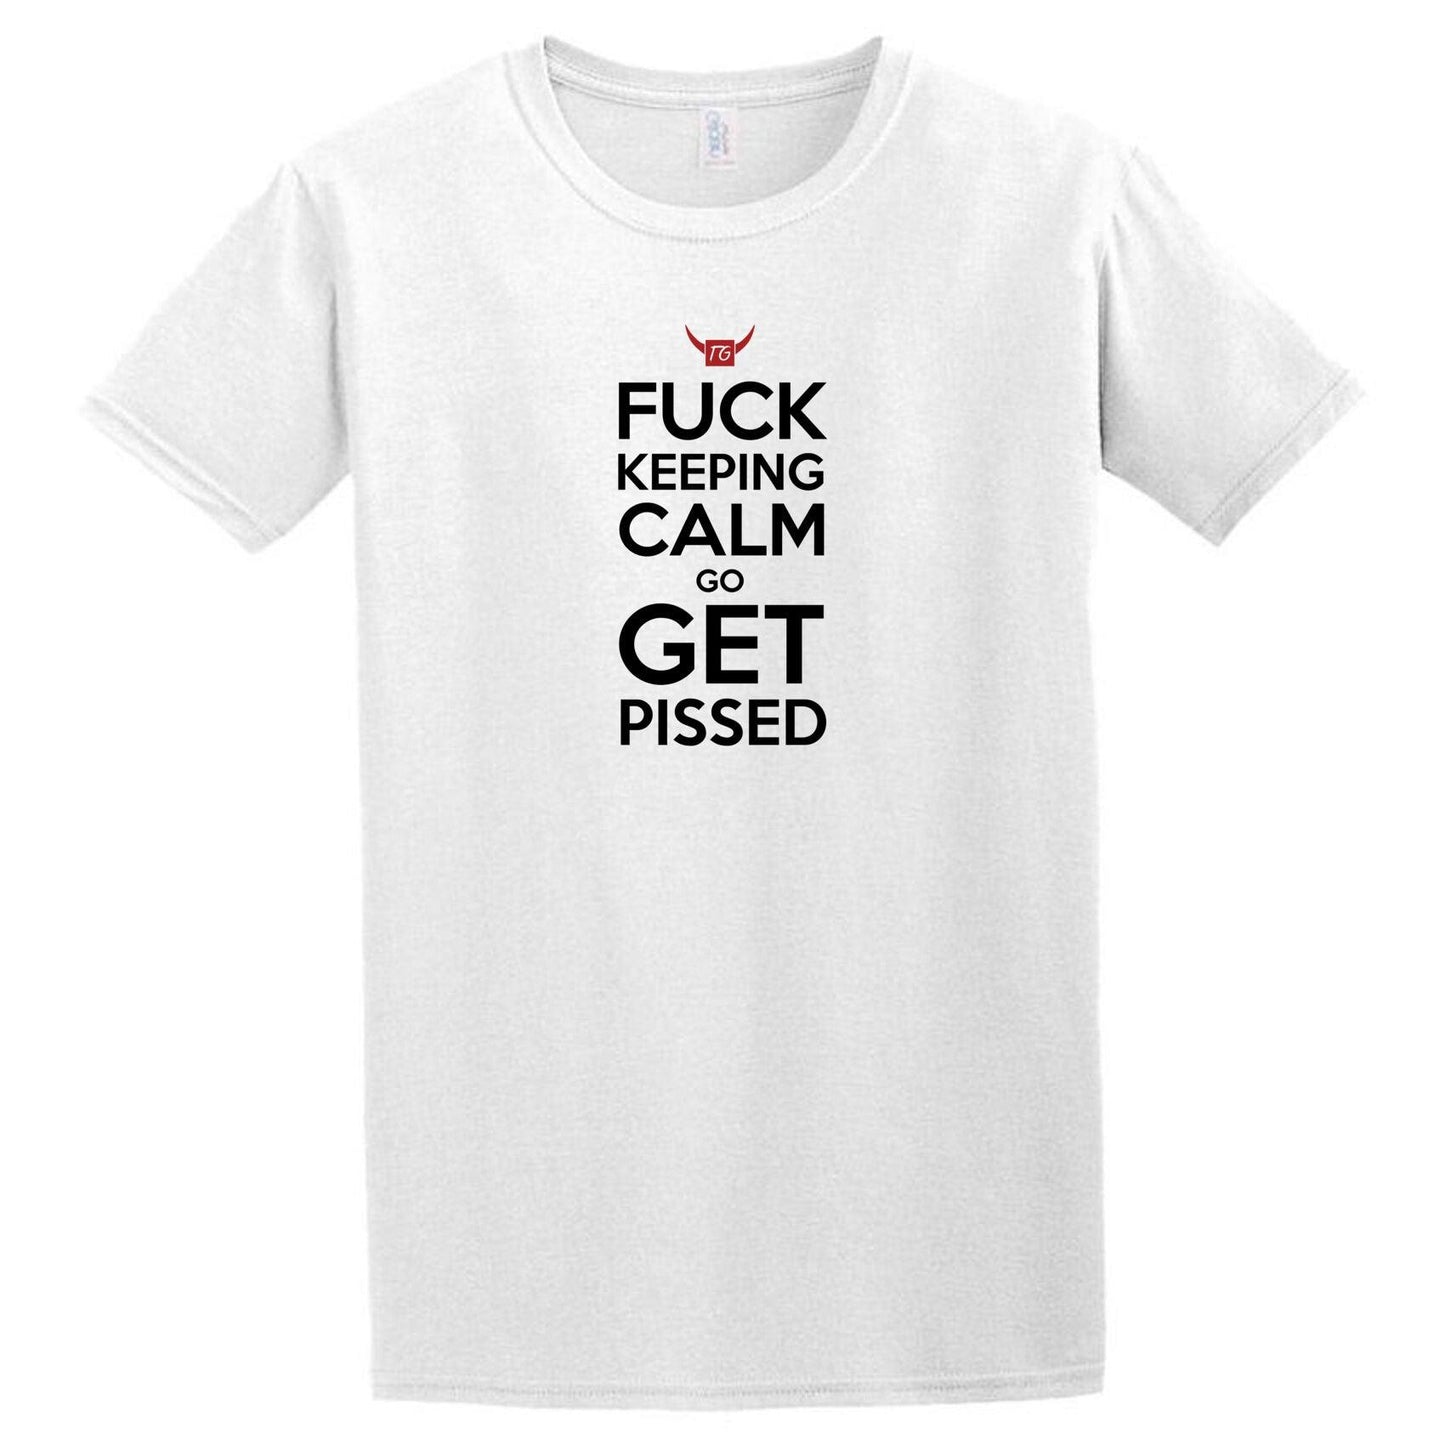 A Twisted Gifts white Get Pissed T-Shirt.